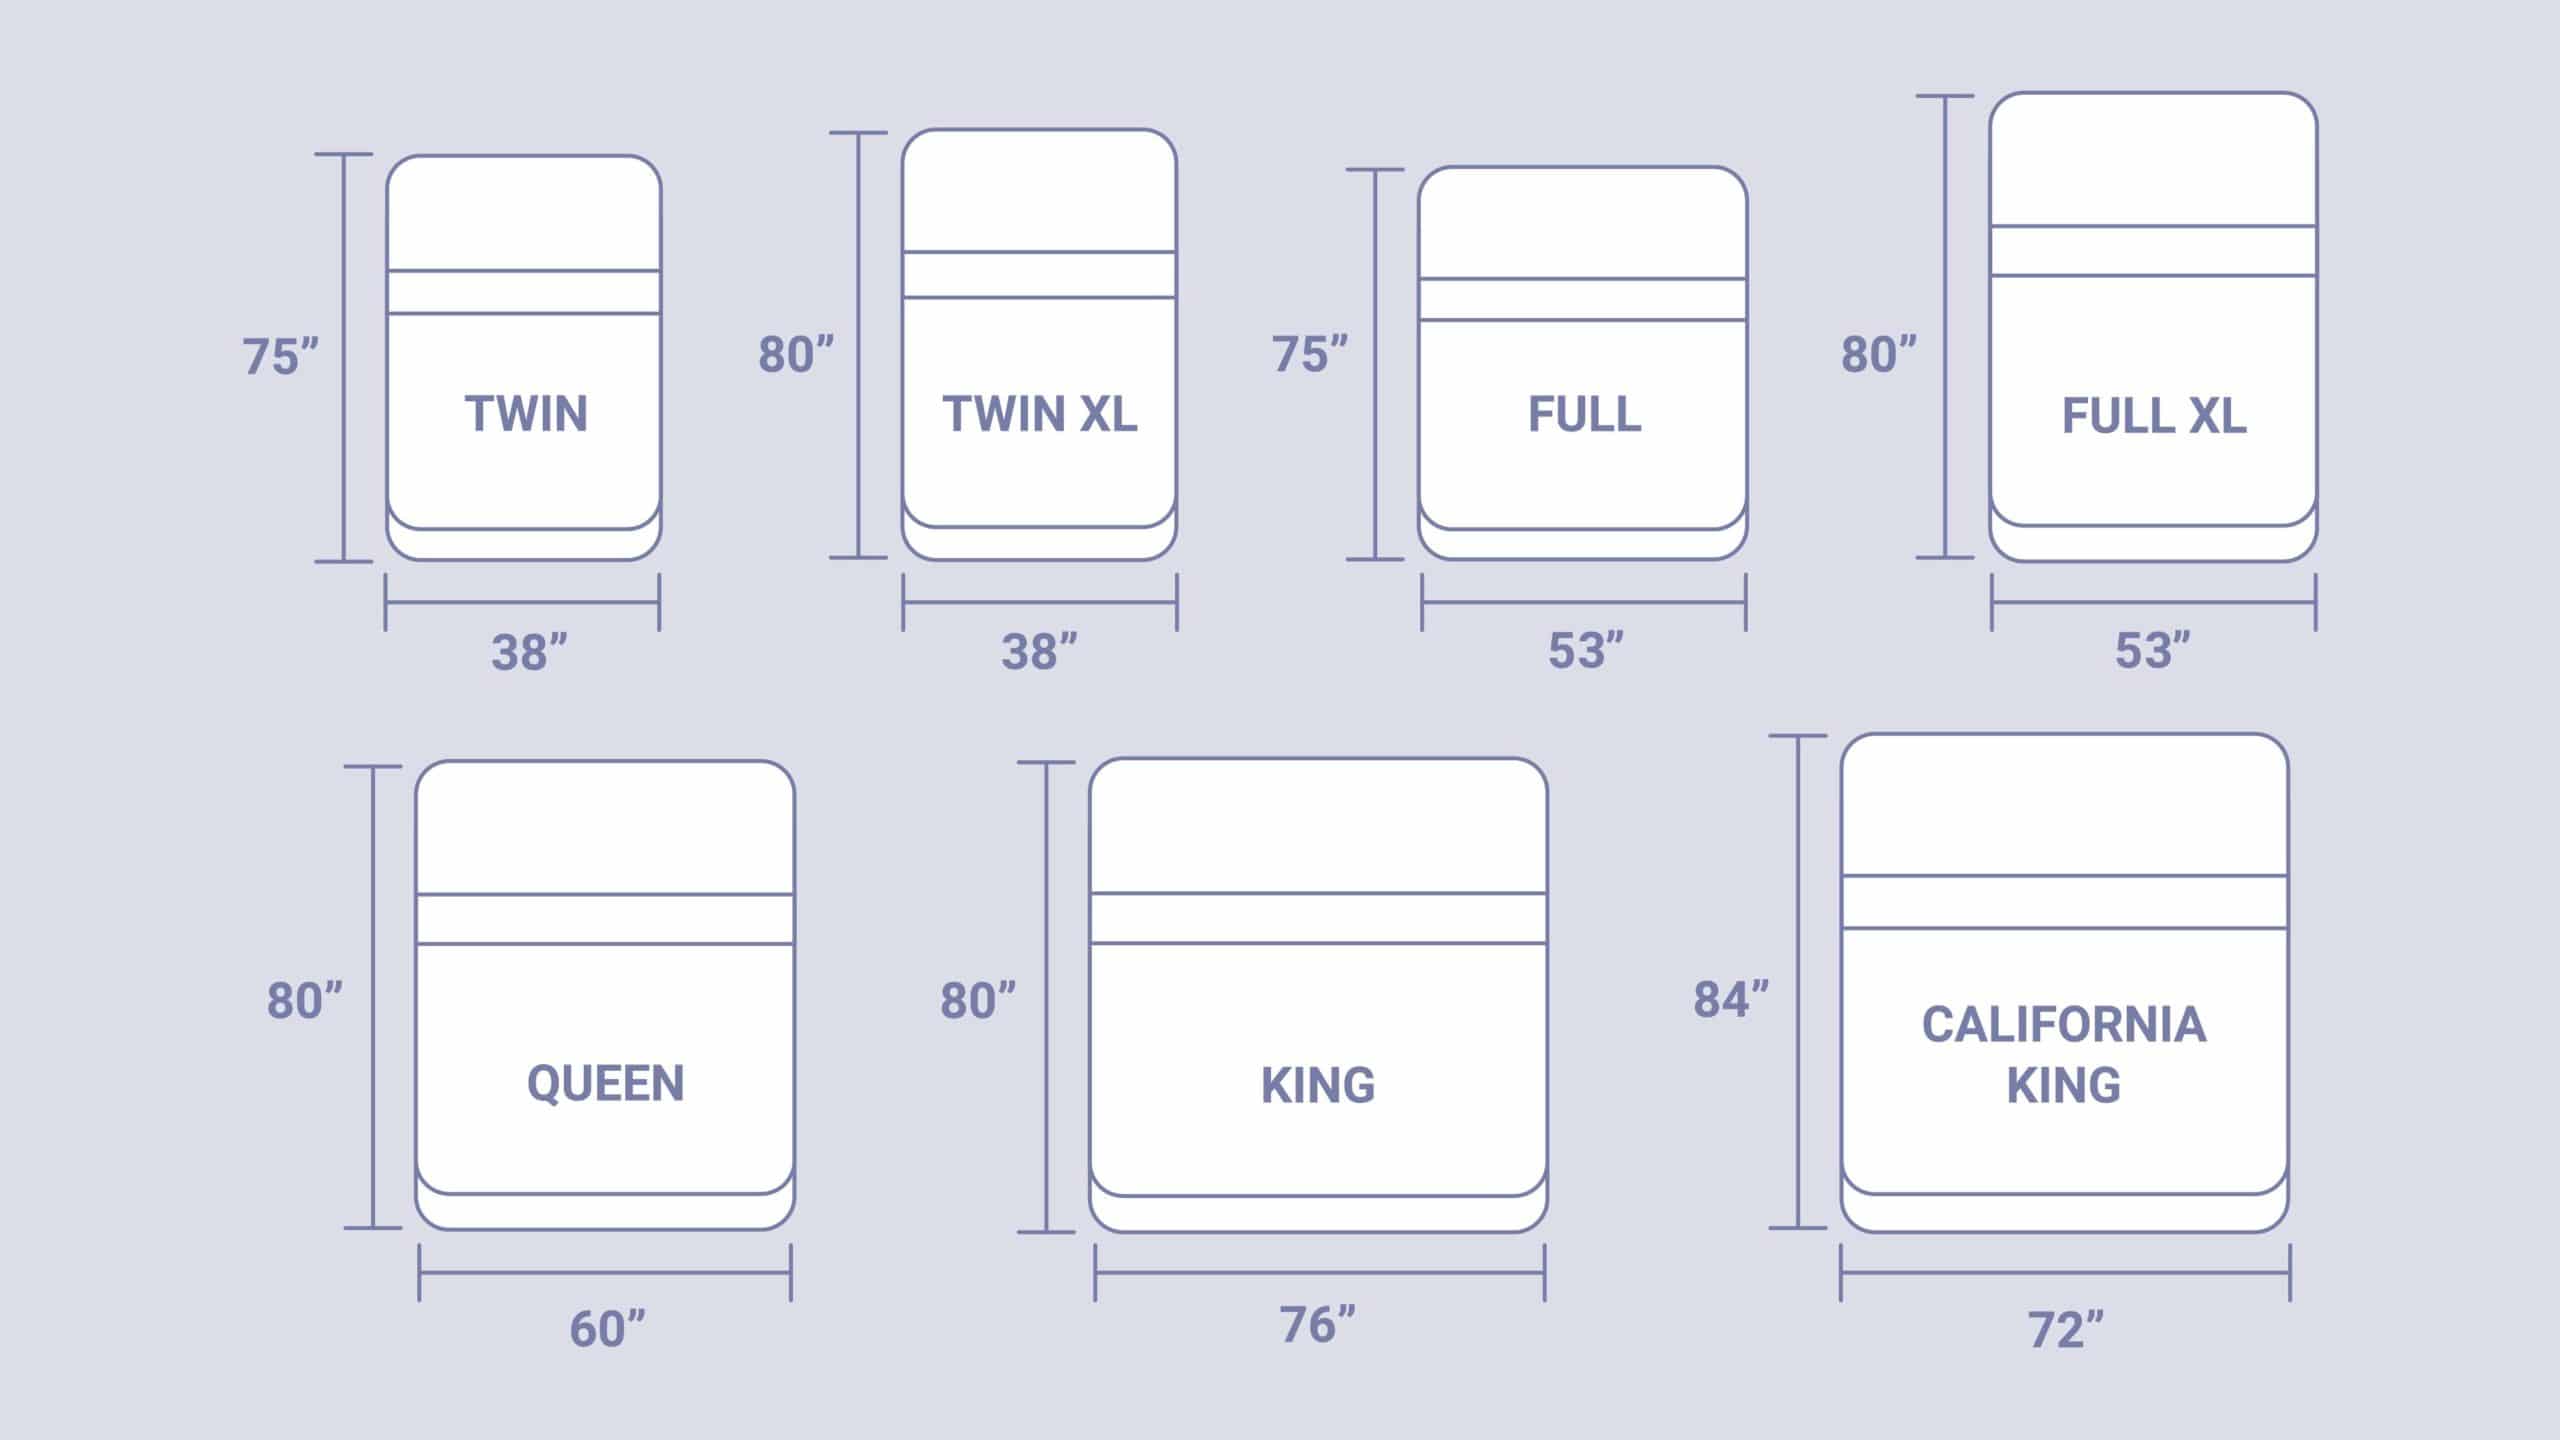 Mattress Sizes And Dimensions Guide, Is There A Bed Size Smaller Than Twin